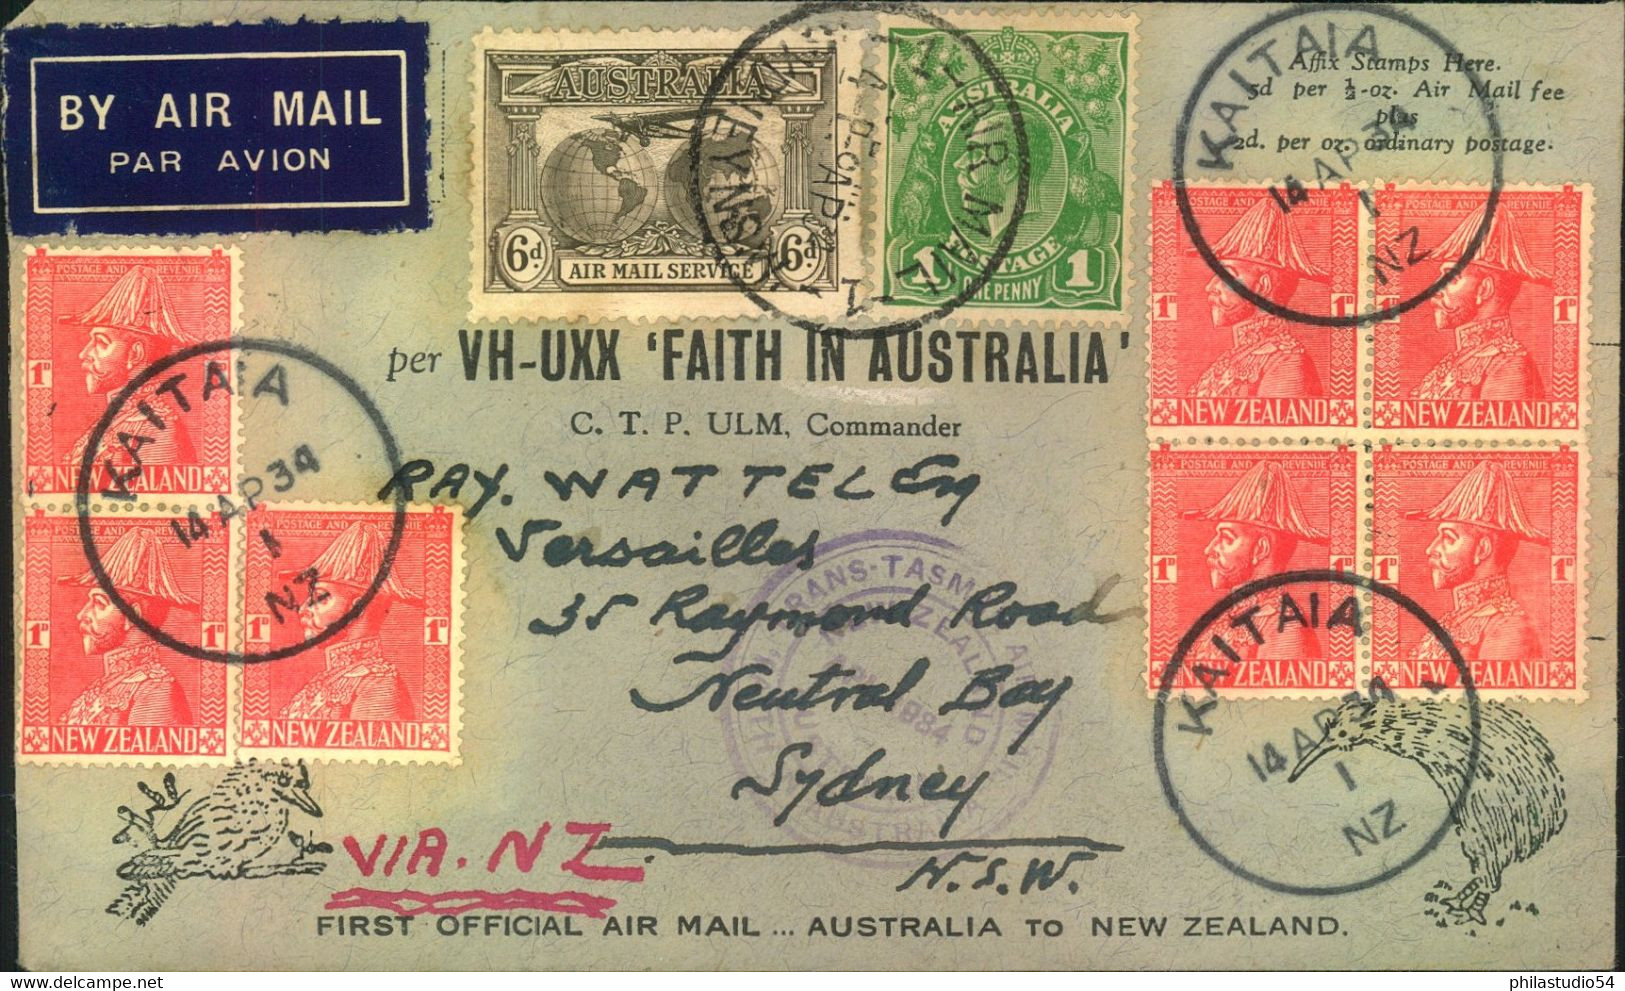 1934, Airmail Per "VH-UKK "FAITH IN AUSTRALIA" From Sydney With Arrival AUCKLAND. Back With New Zealand Franking From KA - Covers & Documents